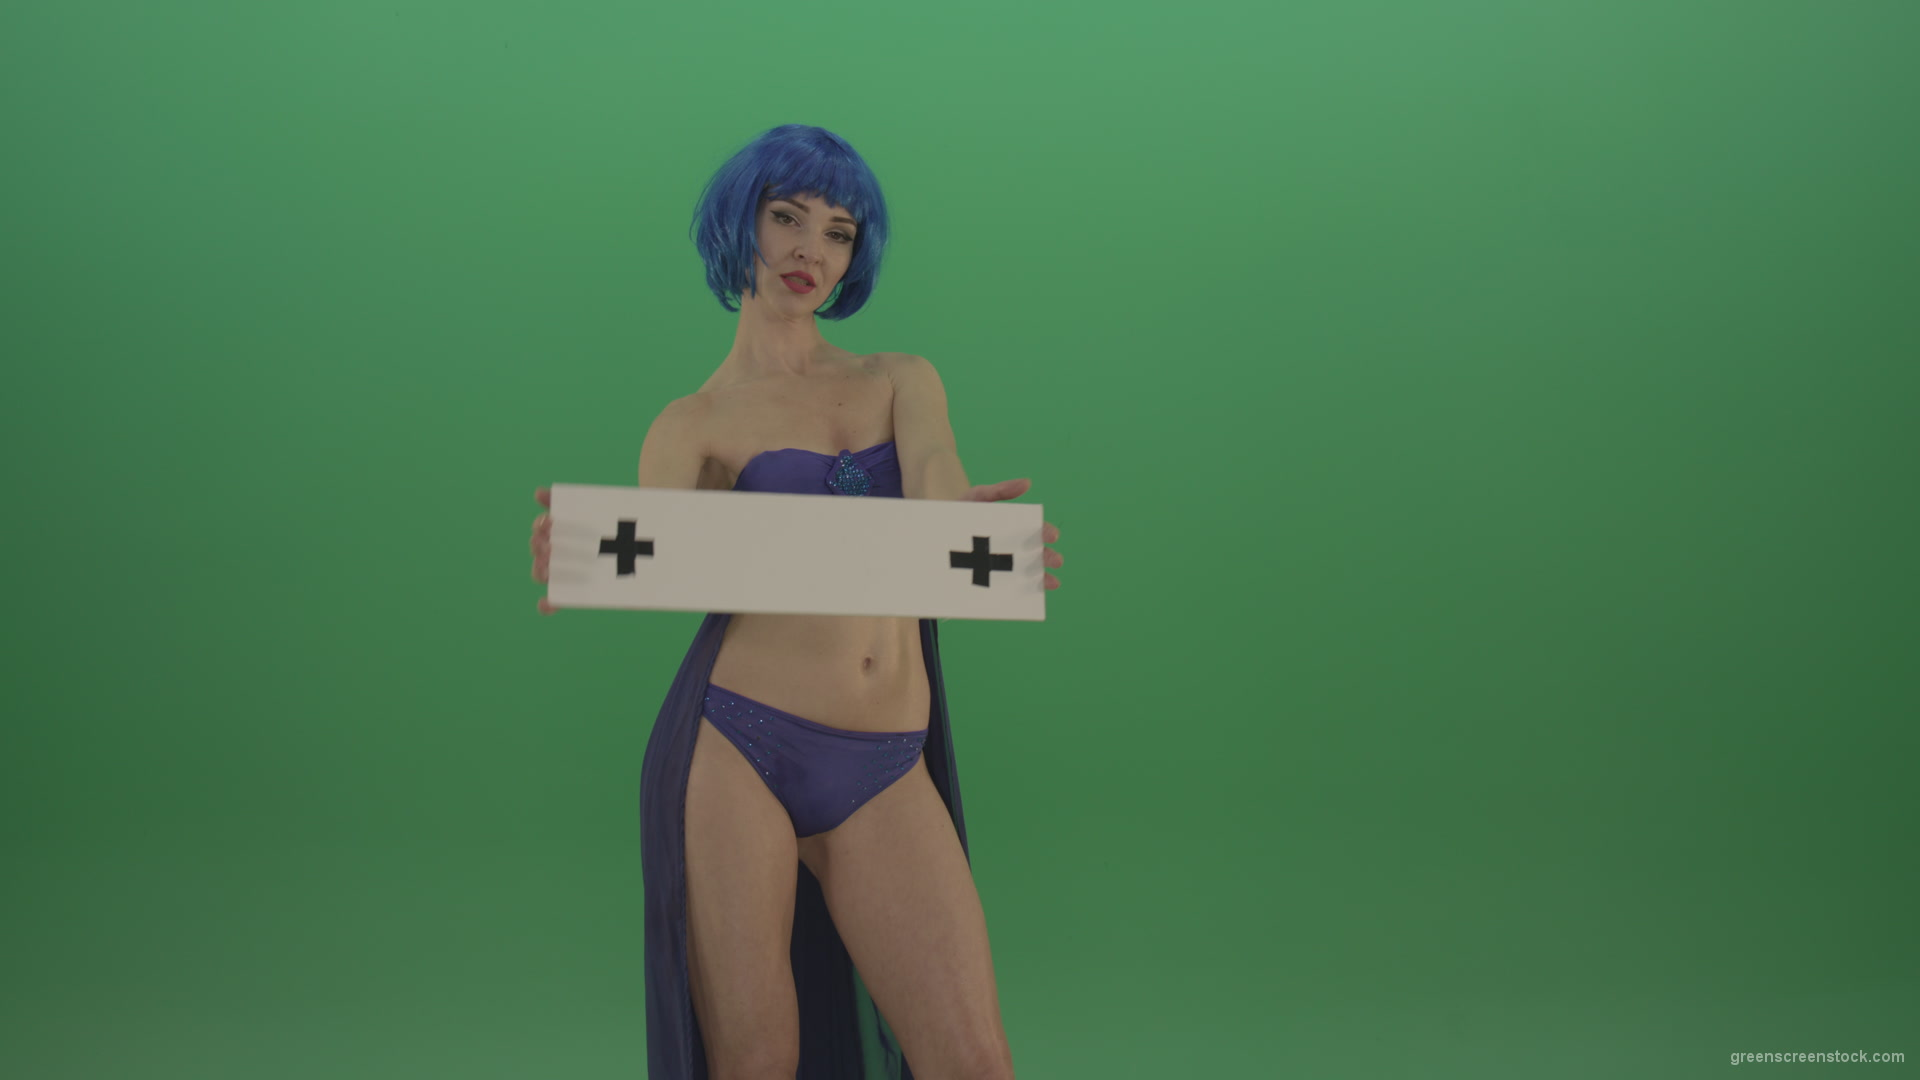 Blue-hair-elegant-naked-girl-posing-with-text-mockup-template-plane-on-green-screen_005 Green Screen Stock